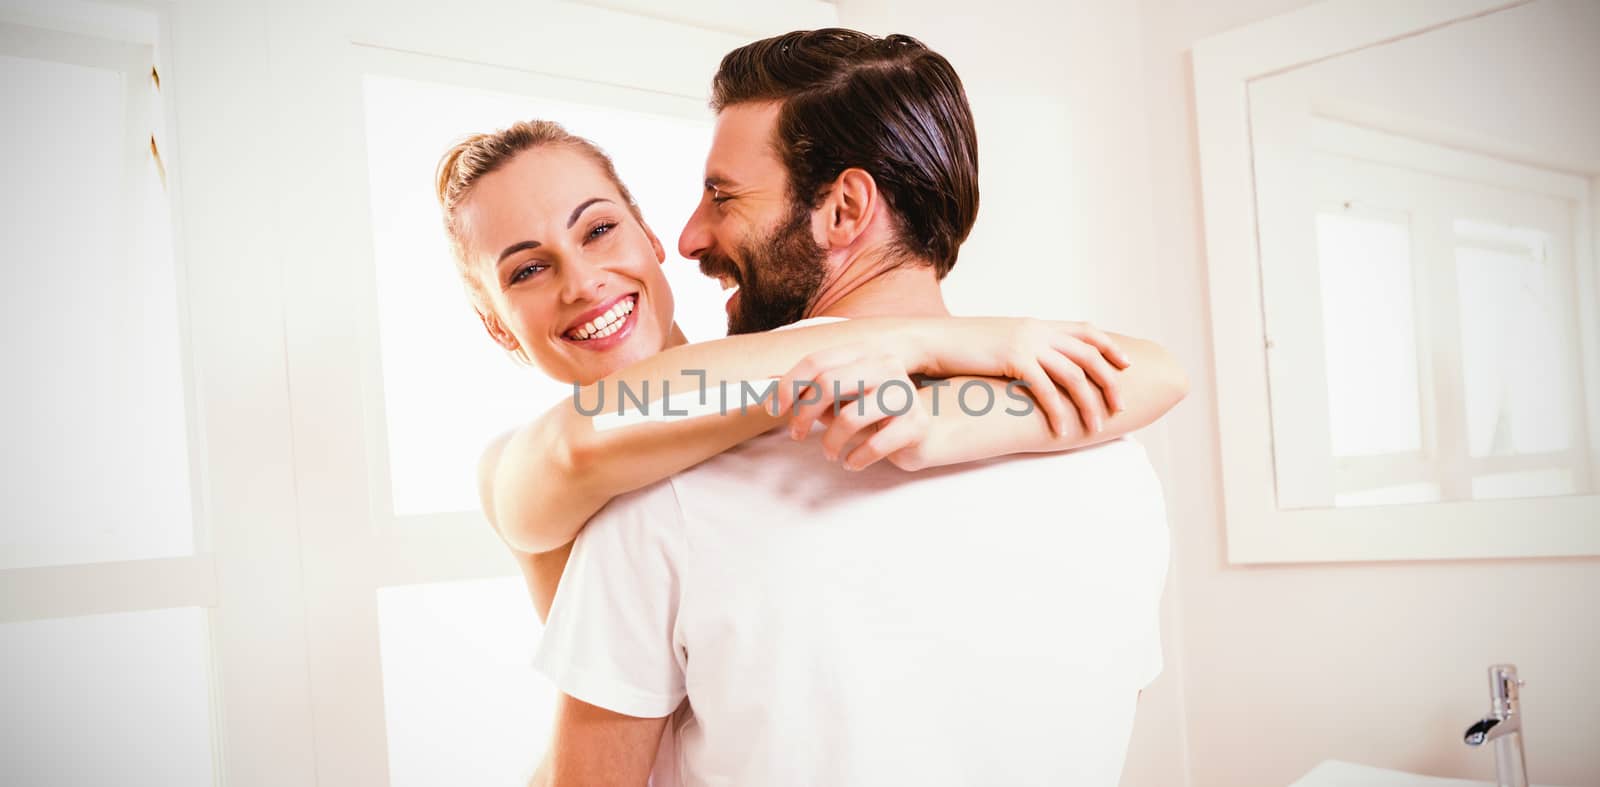 Woman holding pregnancy test while embracing man by Wavebreakmedia